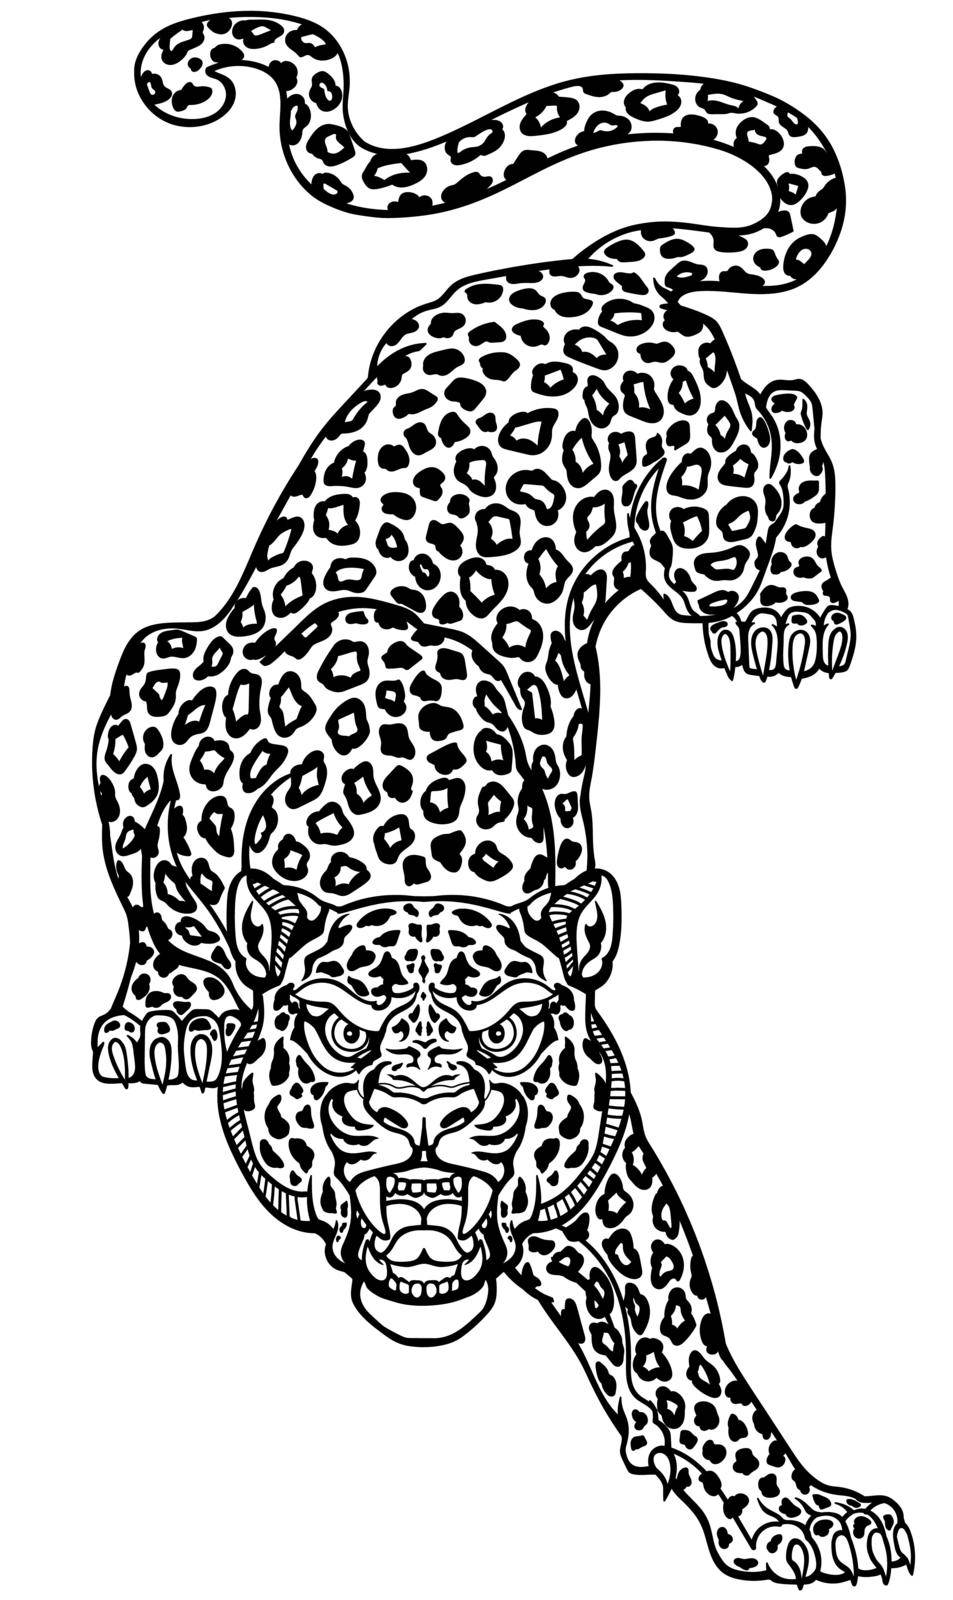 The roaring leopard climbs down looking straight ahead. Crawling spotted panther. Aggressive big cat. Front view. Tattoo style vector illustration